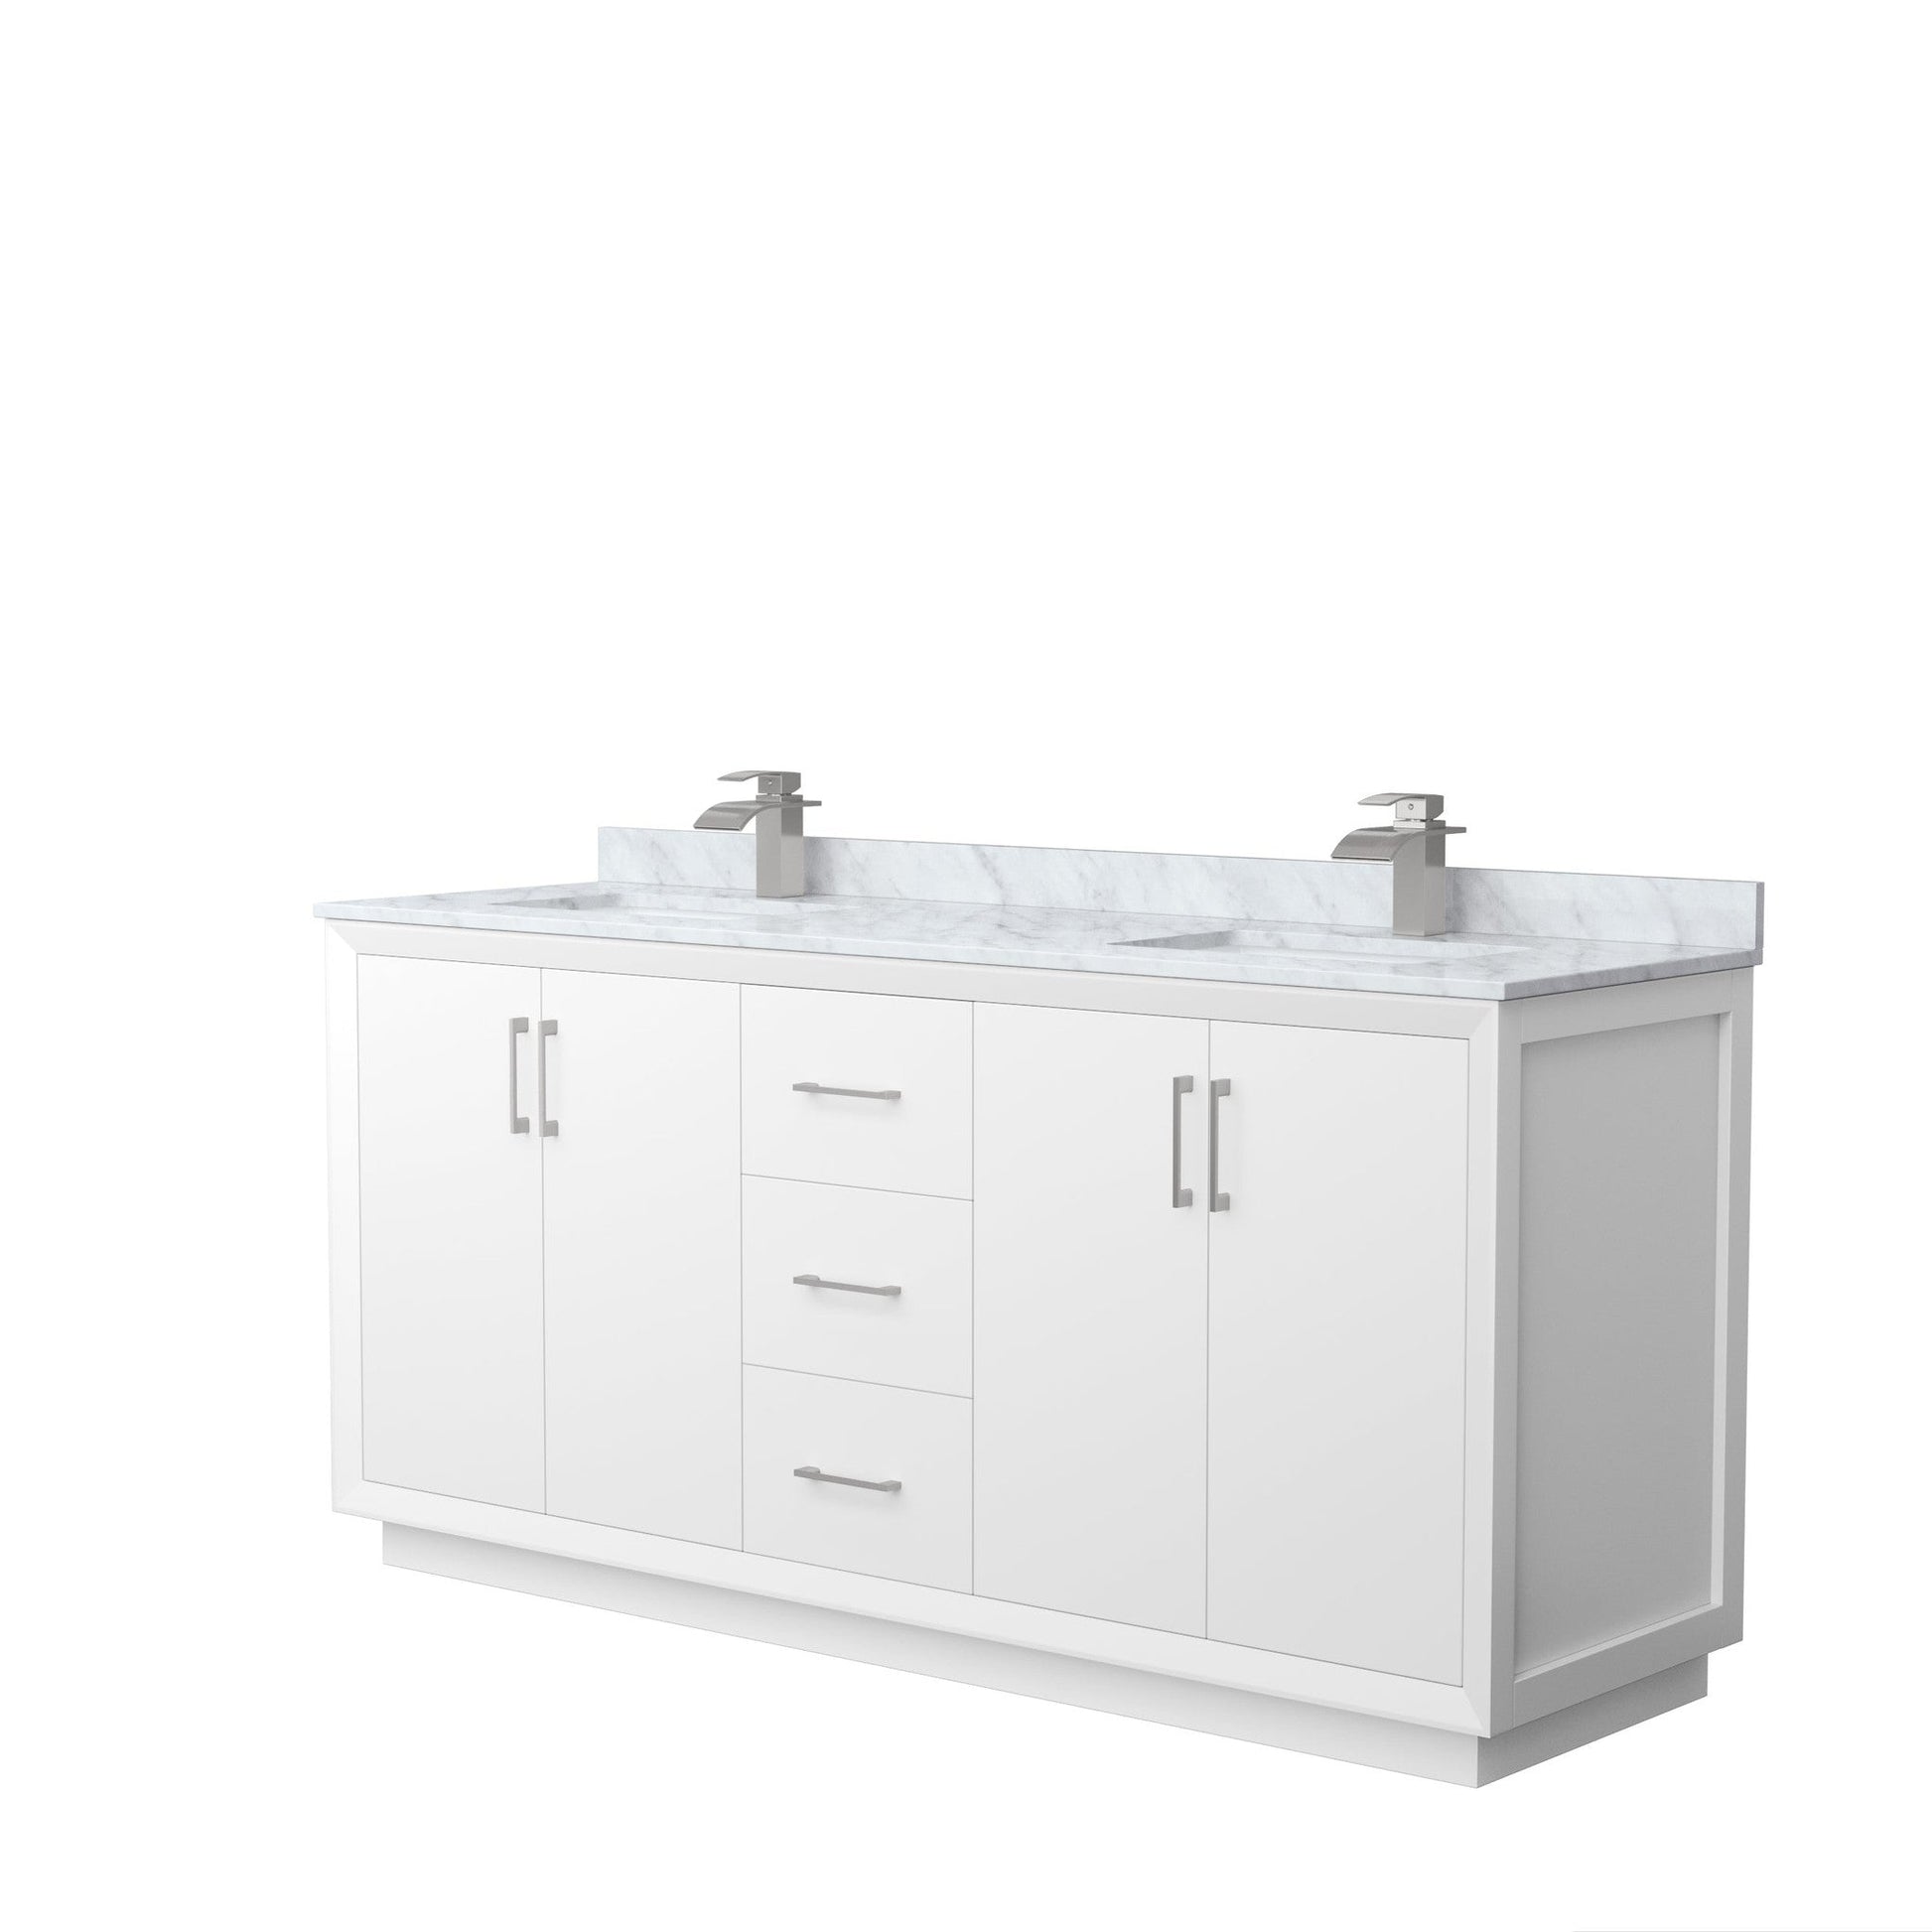 Wyndham Collection Strada 72" Double Bathroom Vanity in White, White Carrara Marble Countertop, Undermount Square Sink, Brushed Nickel Trim